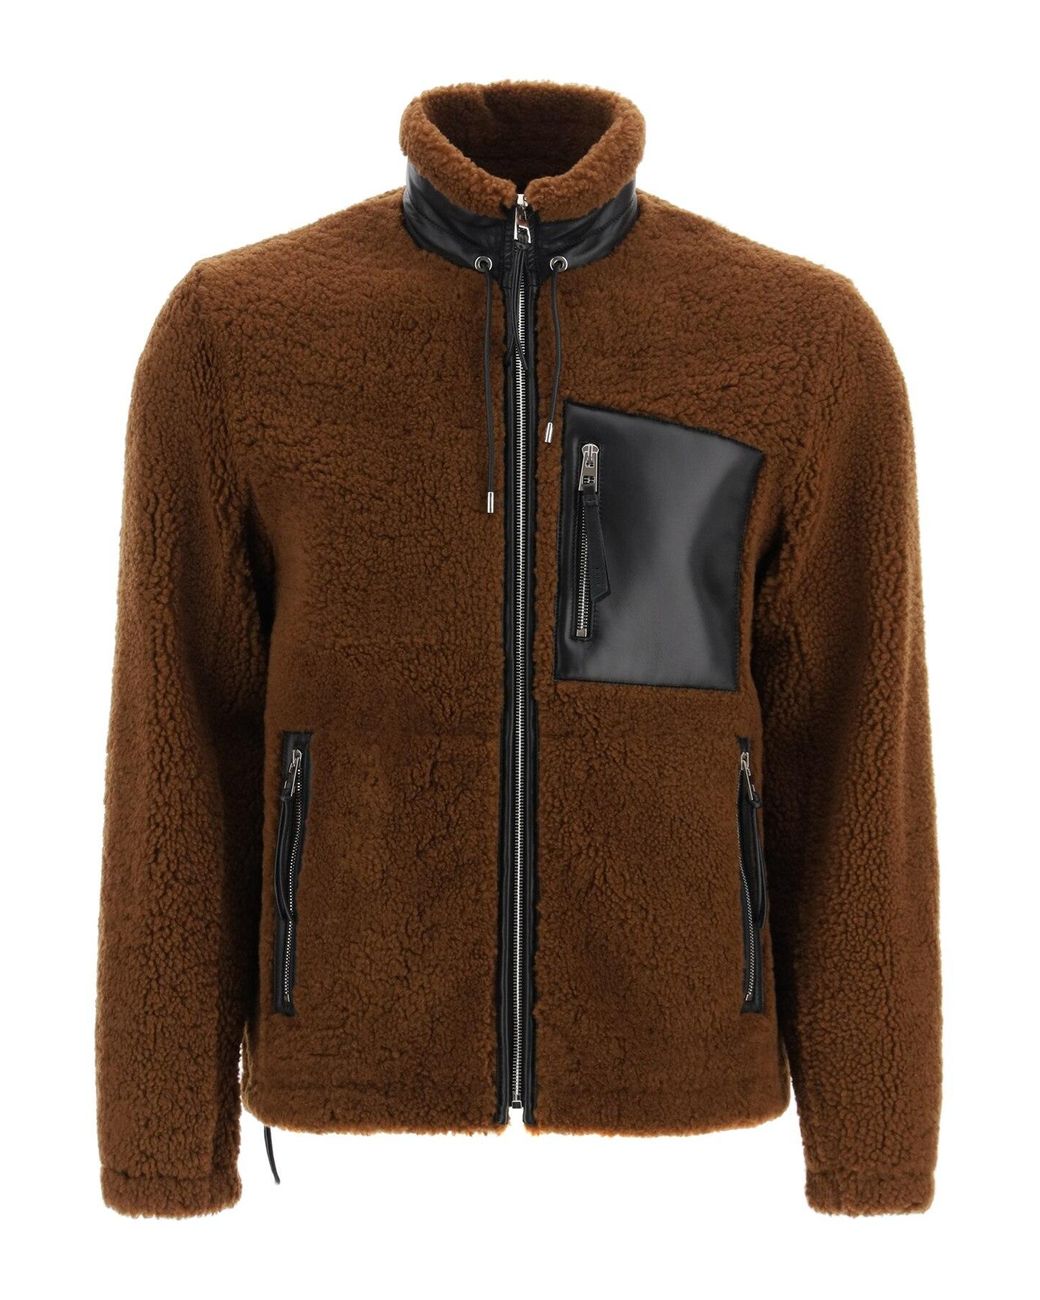 Loewe Leather Shearling Jacket in Brown for Men - Lyst